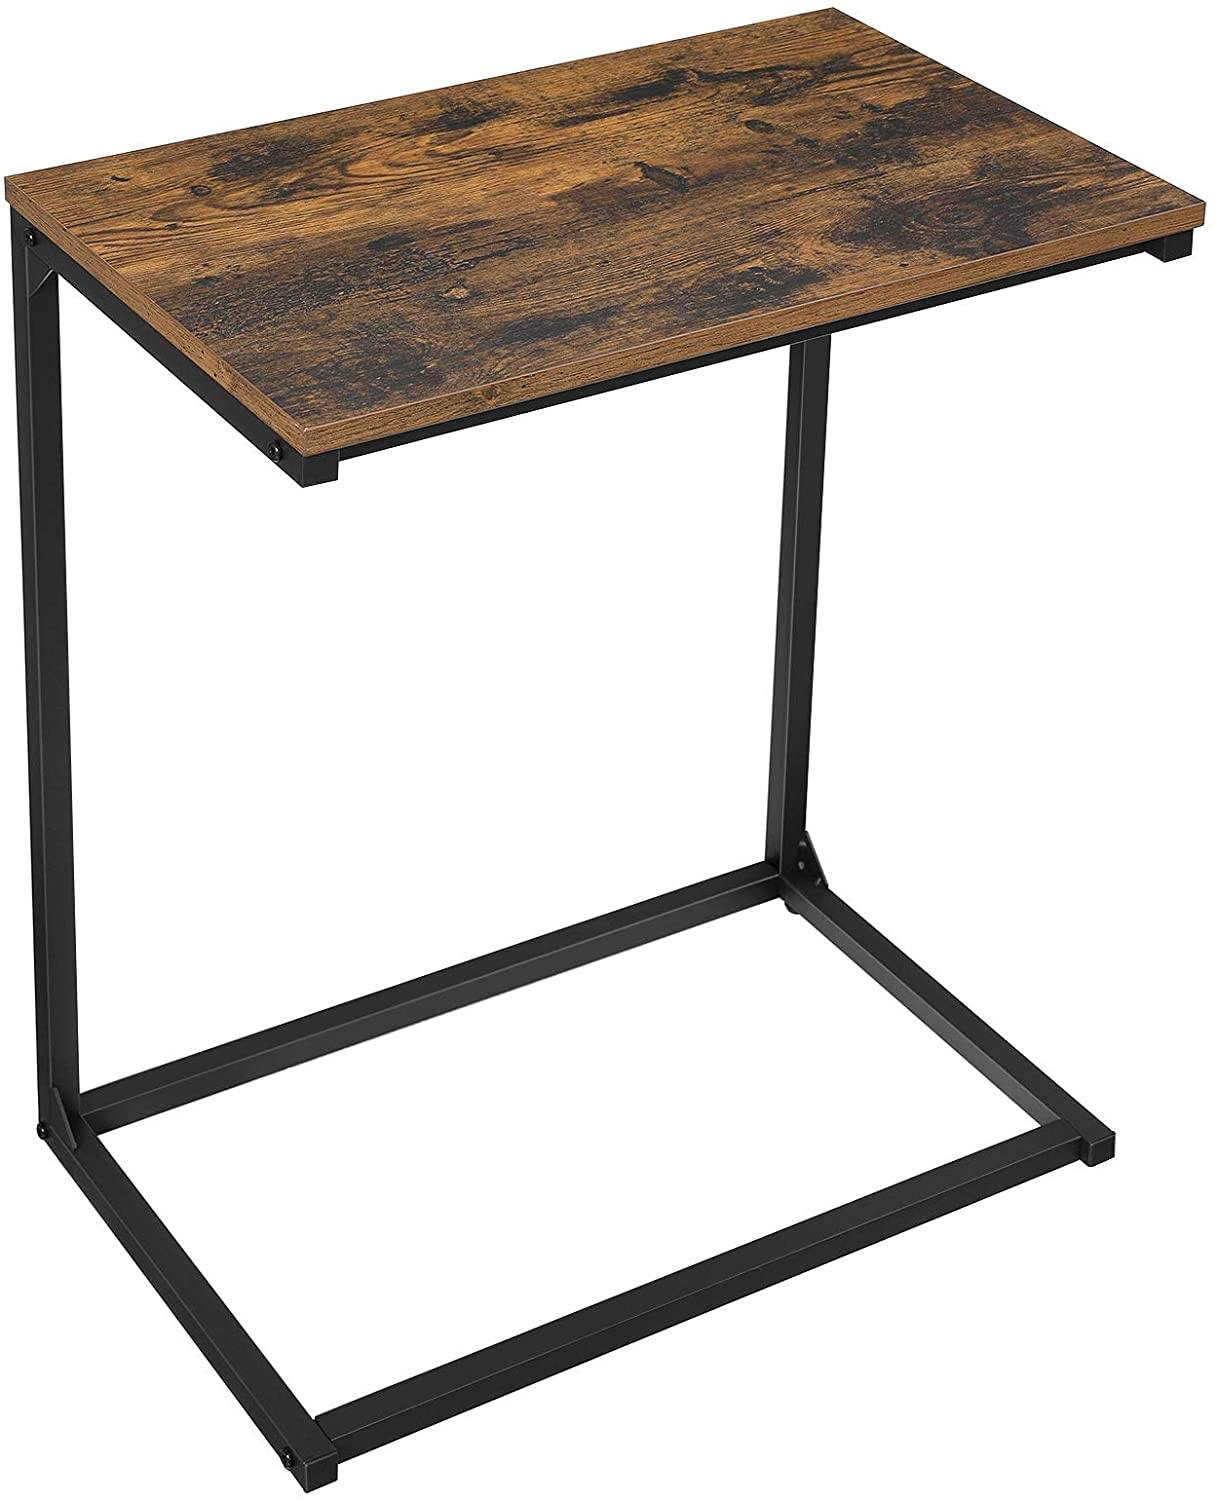 Side Table, Small Sofa Table, End Table, Laptop Table, for Bedroom, Living Room, Work in Bed or on The Sofa, Simple Structure, Stable, Industrial Style, Rustic Brown and Black LNT52BX RAW58.dk 